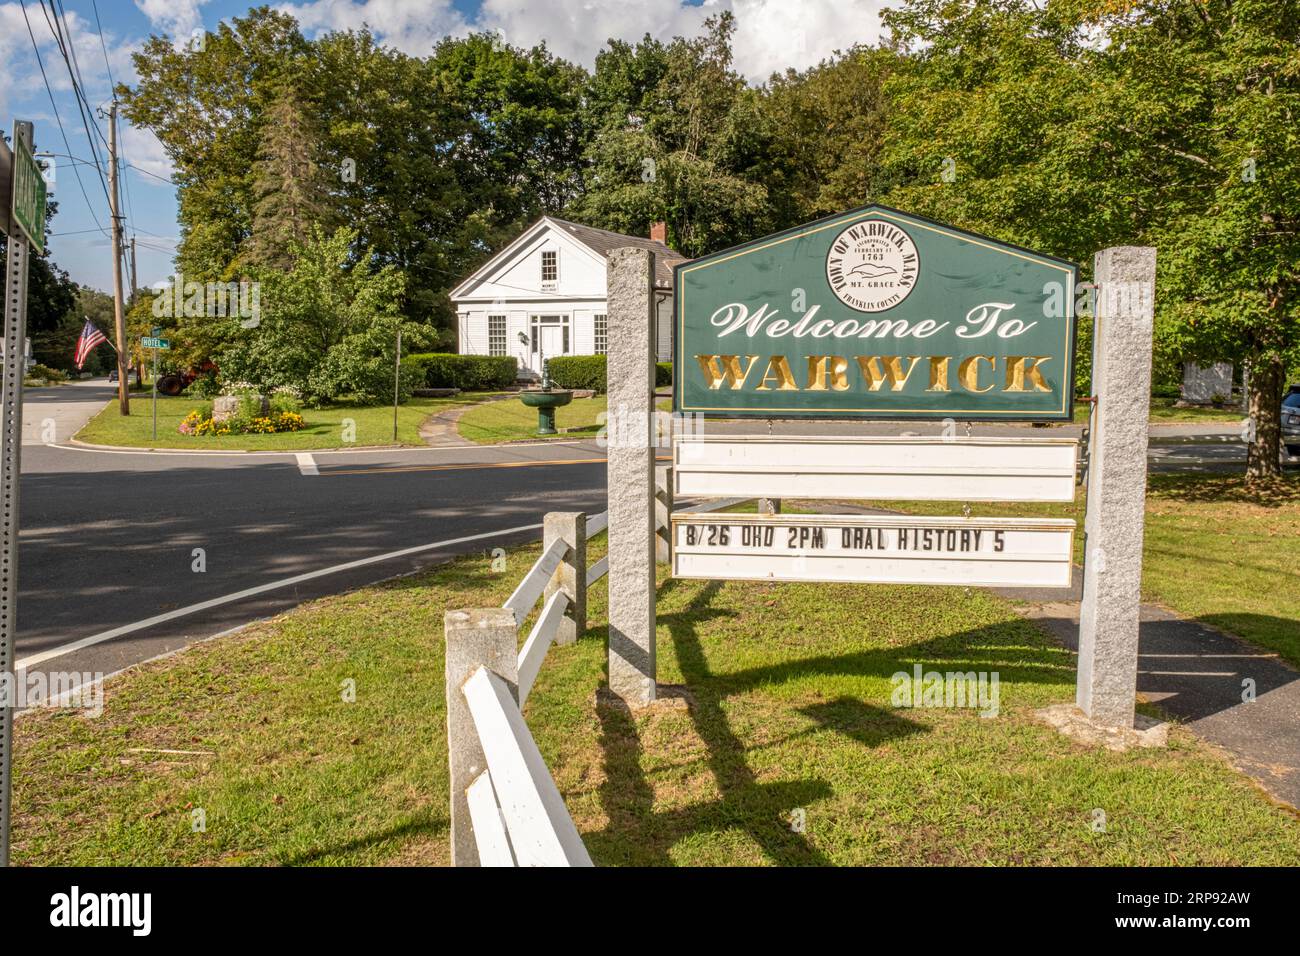 A sign as one enters the town of Warwick, MA Stock Photo